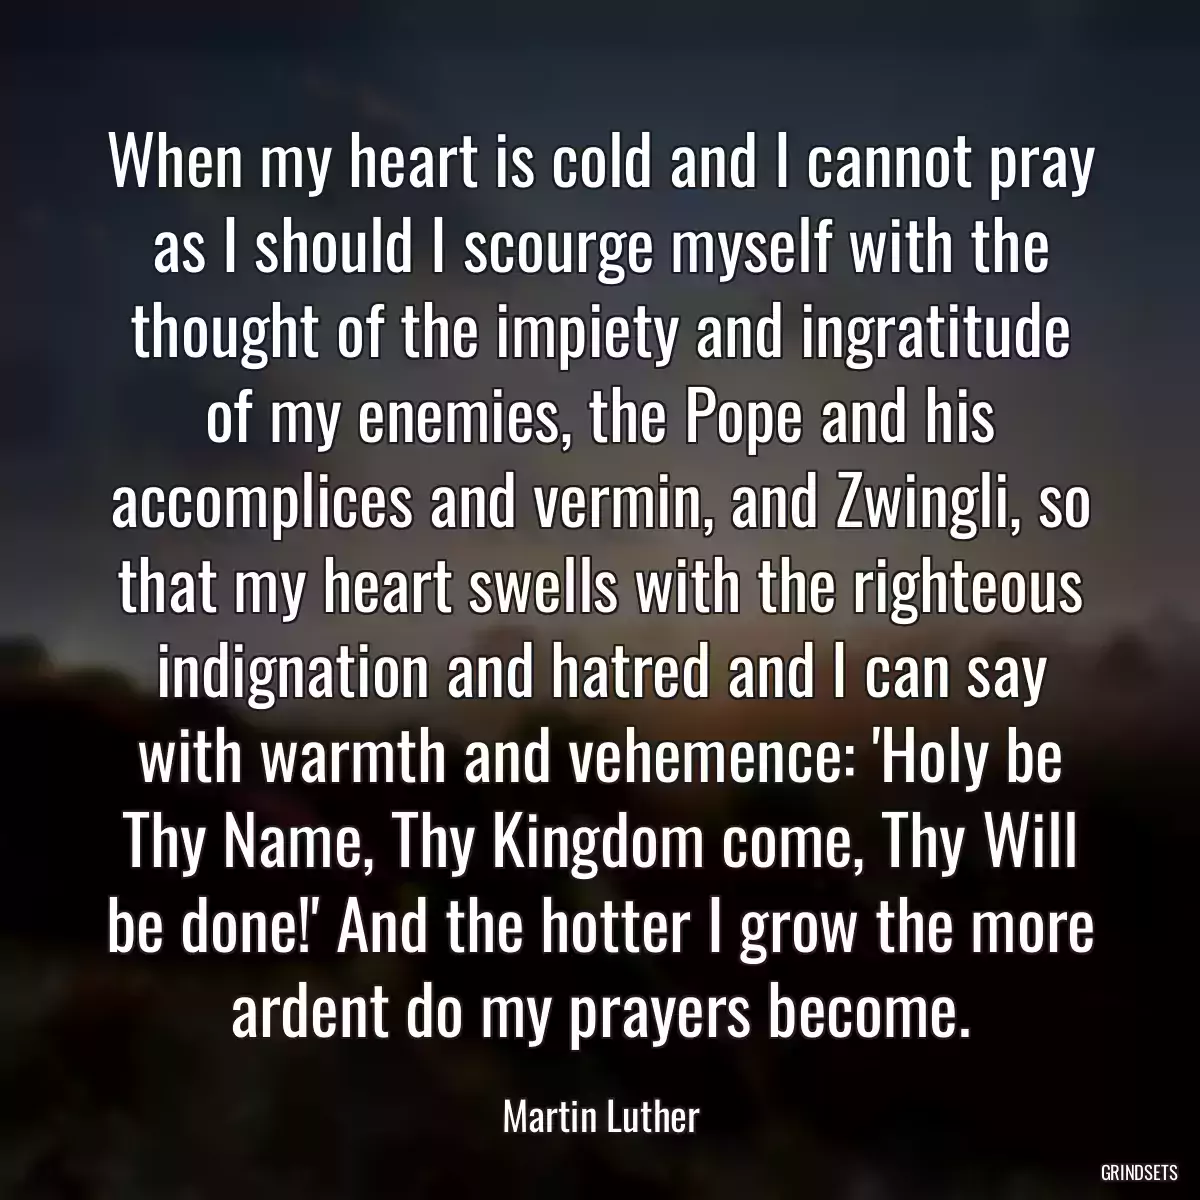 When my heart is cold and I cannot pray as I should I scourge myself with the thought of the impiety and ingratitude of my enemies, the Pope and his accomplices and vermin, and Zwingli, so that my heart swells with the righteous indignation and hatred and I can say with warmth and vehemence: \'Holy be Thy Name, Thy Kingdom come, Thy Will be done!\' And the hotter I grow the more ardent do my prayers become.